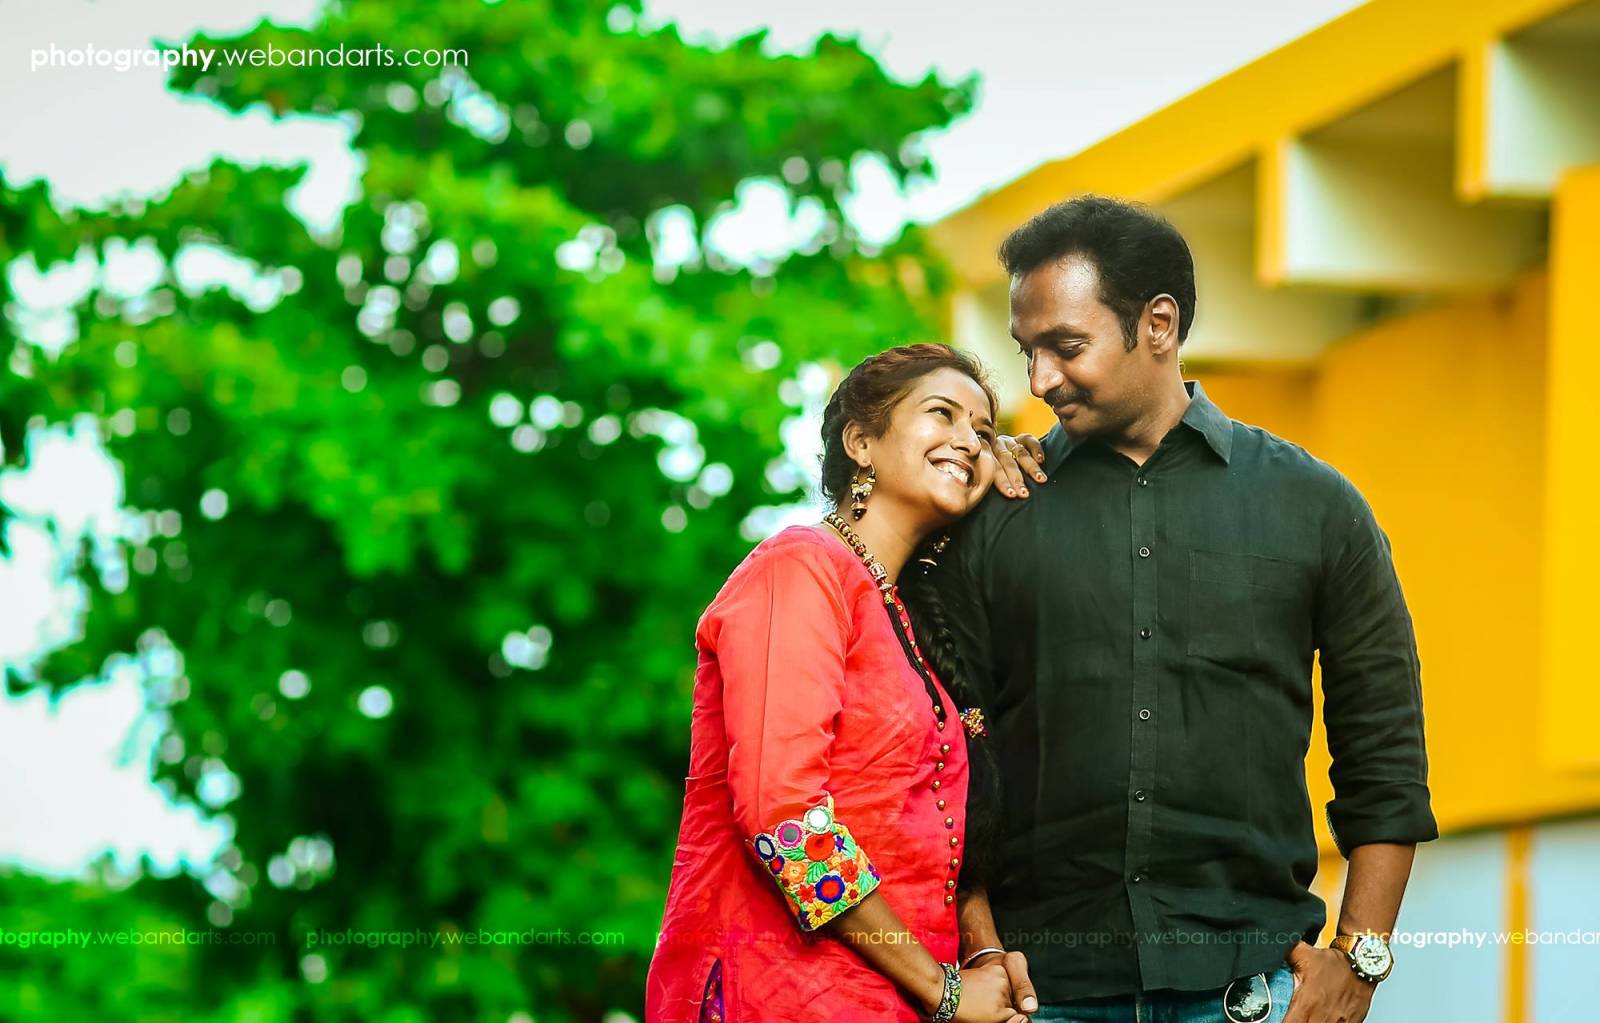 family_outdoor_photography_moments_anniversary_pondicherry-570